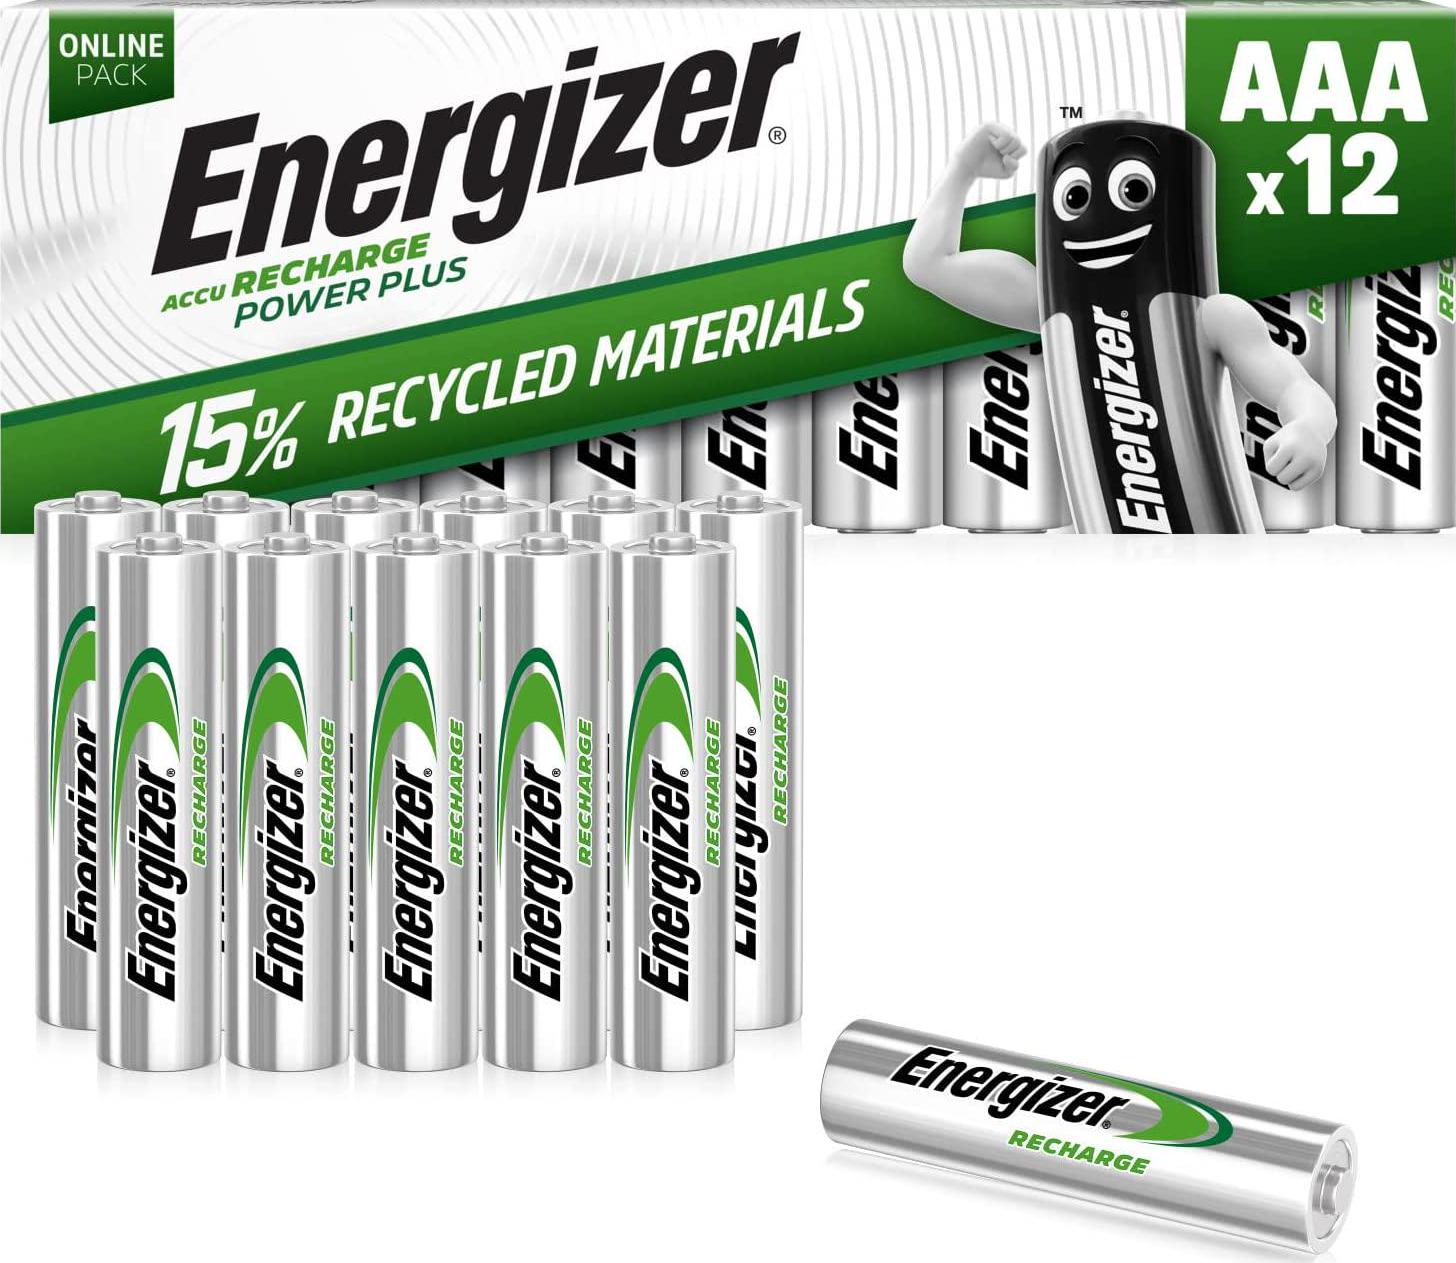 Energizer, Energizer Rechargeable Batteries AAA, Recharge Power Plus, Pack of 12